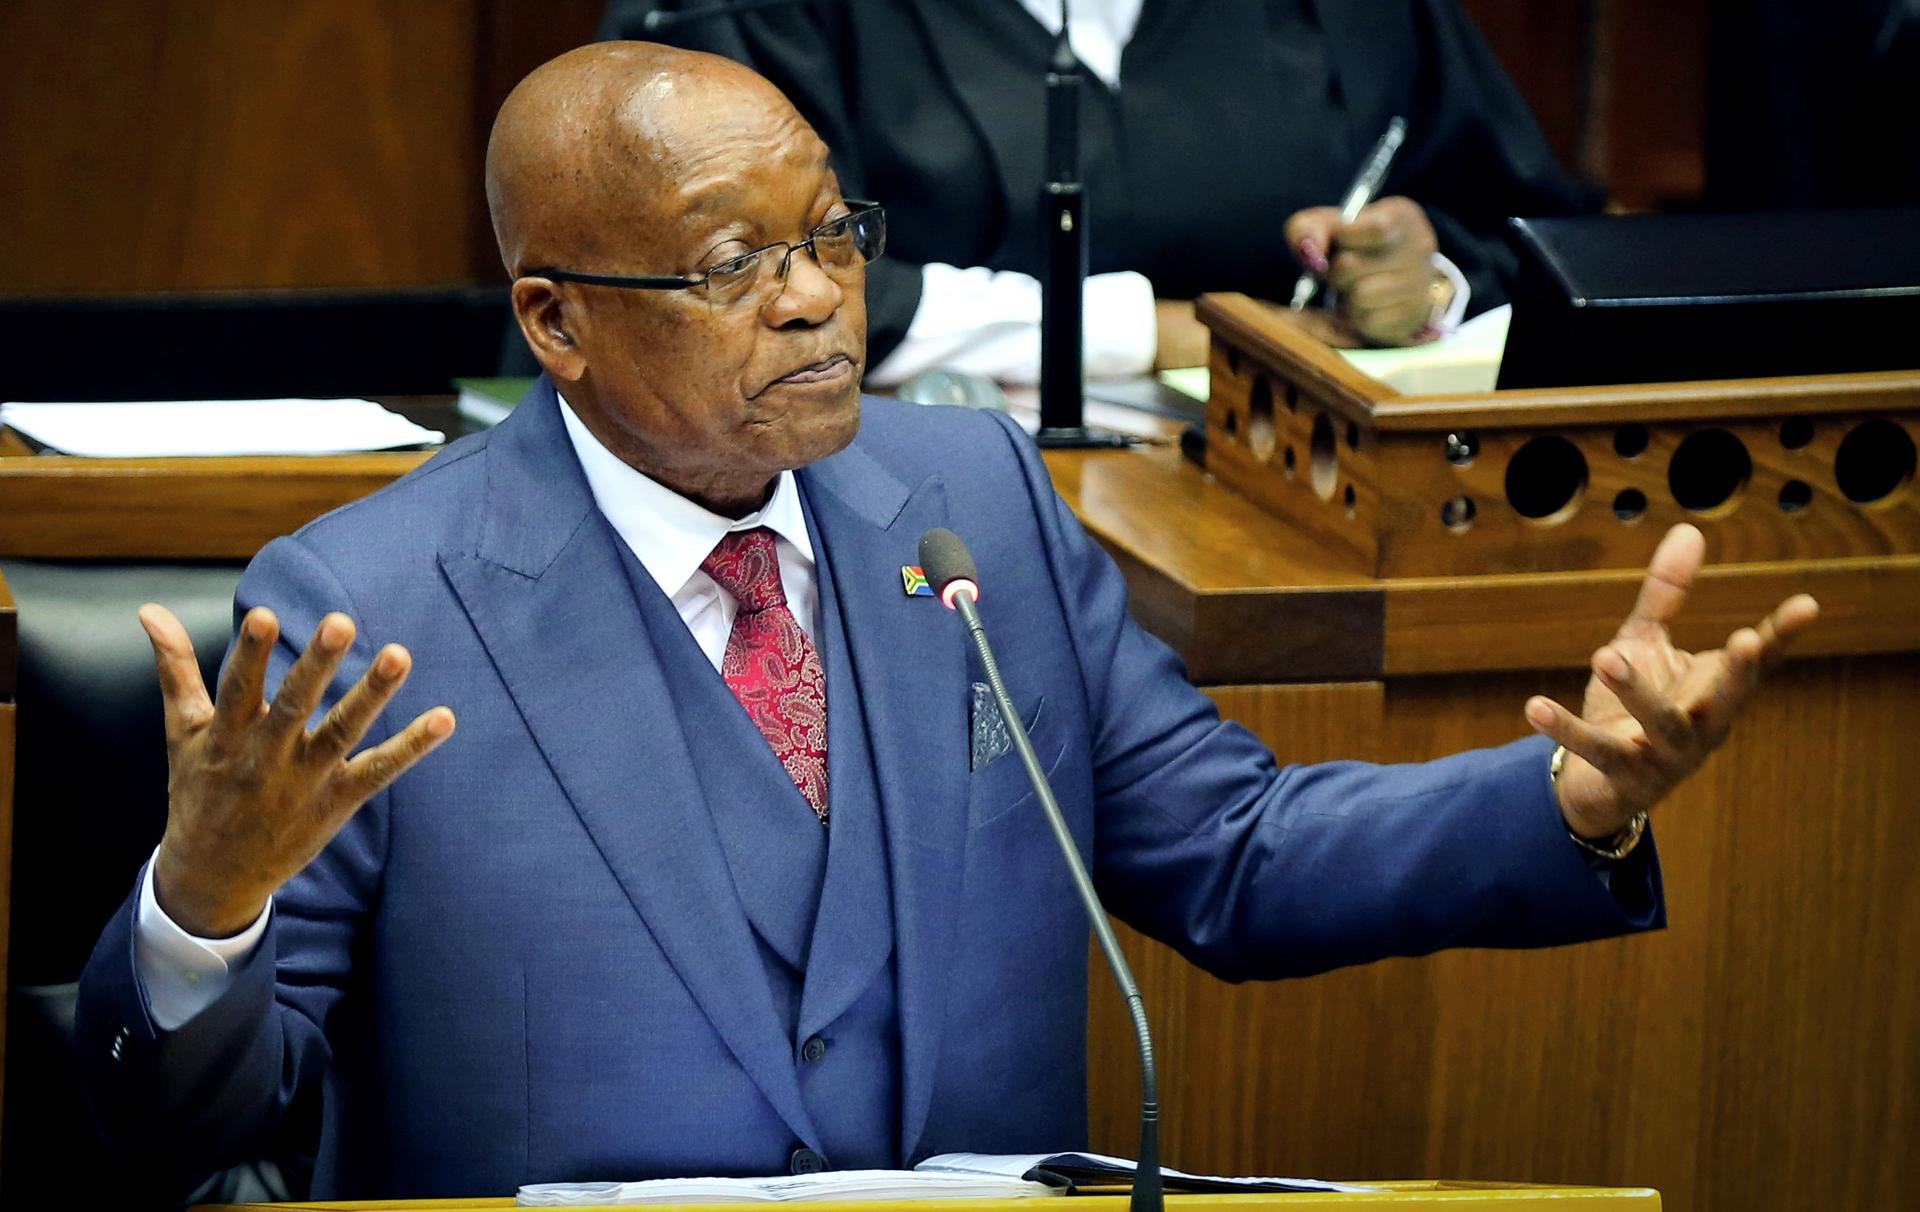 President Jacob Zuma gestures as he addresses parliament in Cape Town.